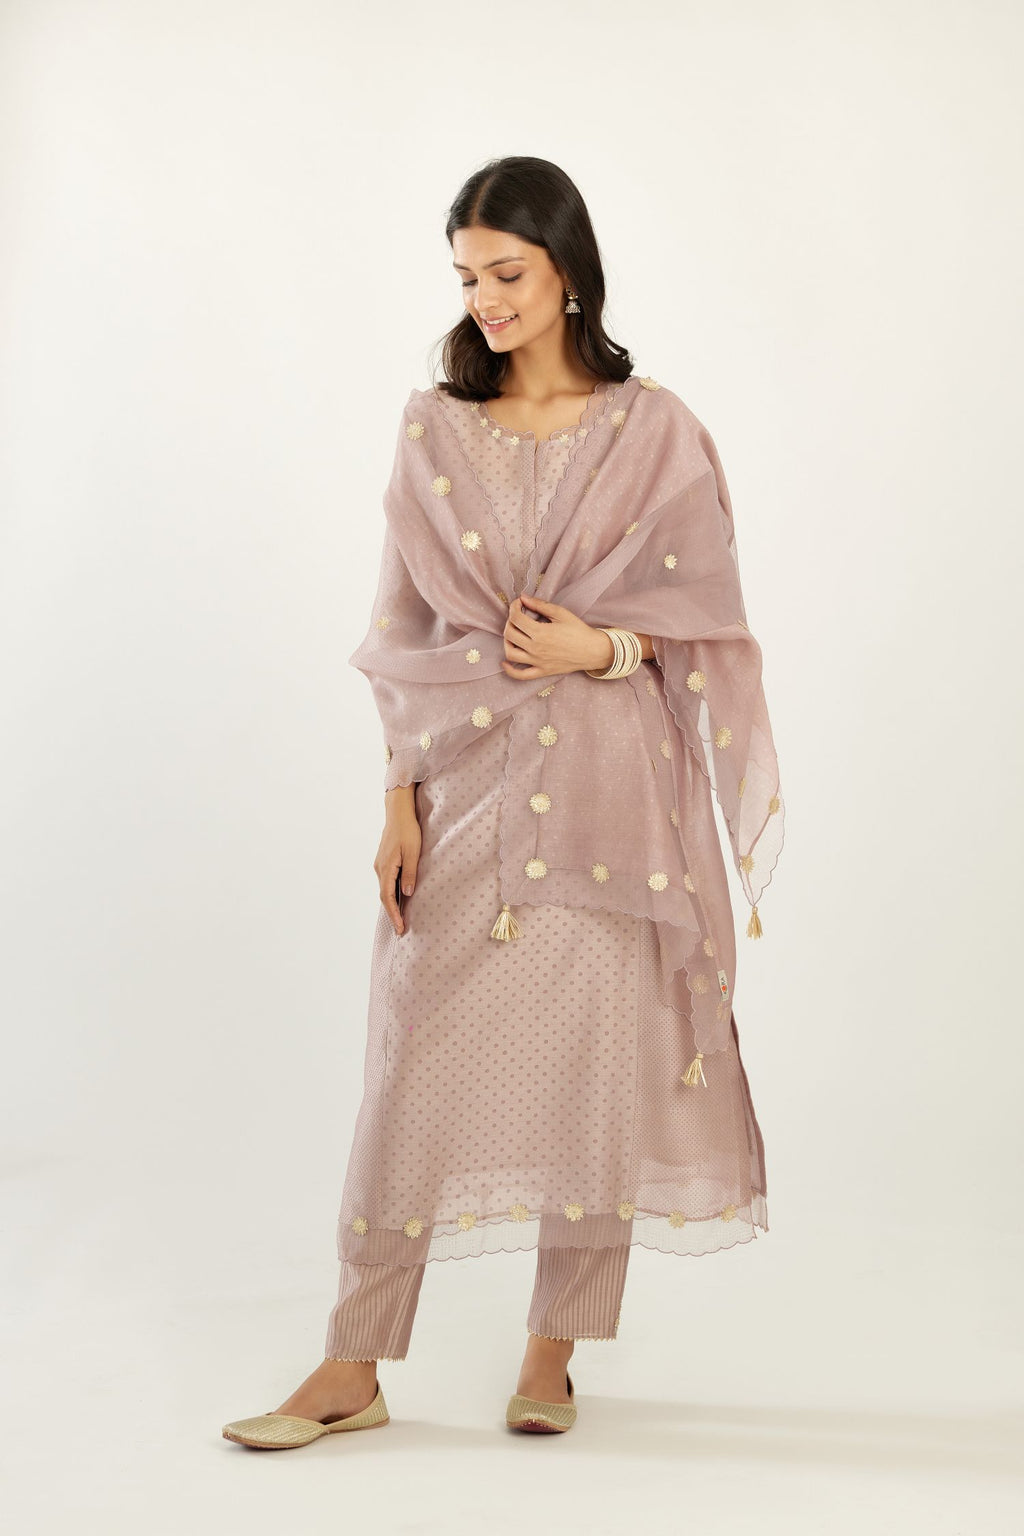 Lilac hand block printed silk chanderi kurta set with concealed button placket neckline, Highlighted with gota flower and scalloped organza at edges.